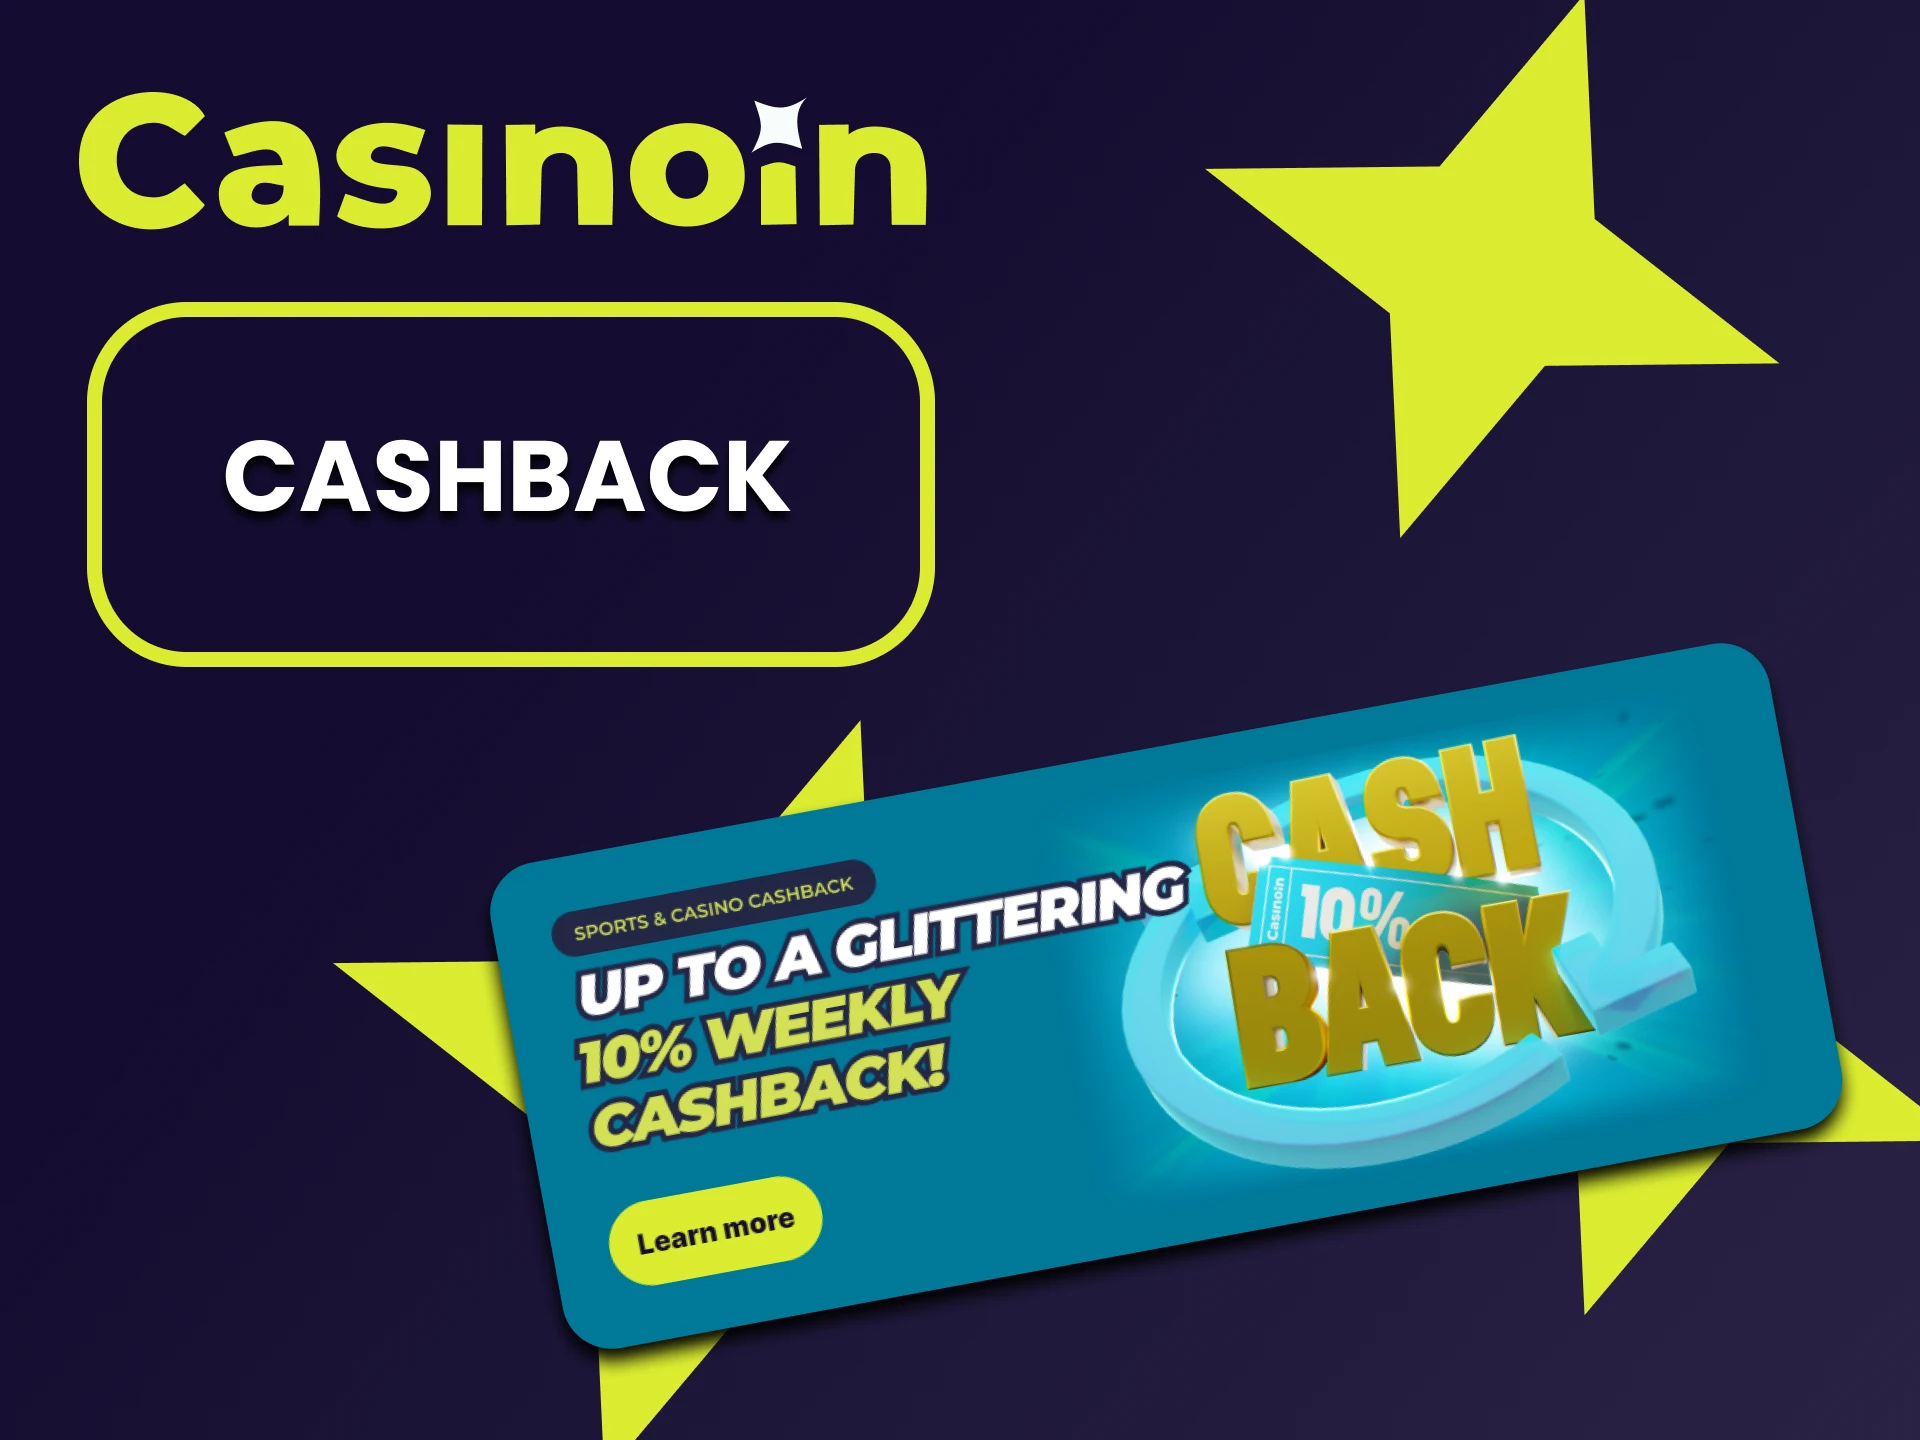 Casinoin gives a bonus in the form of cashback.